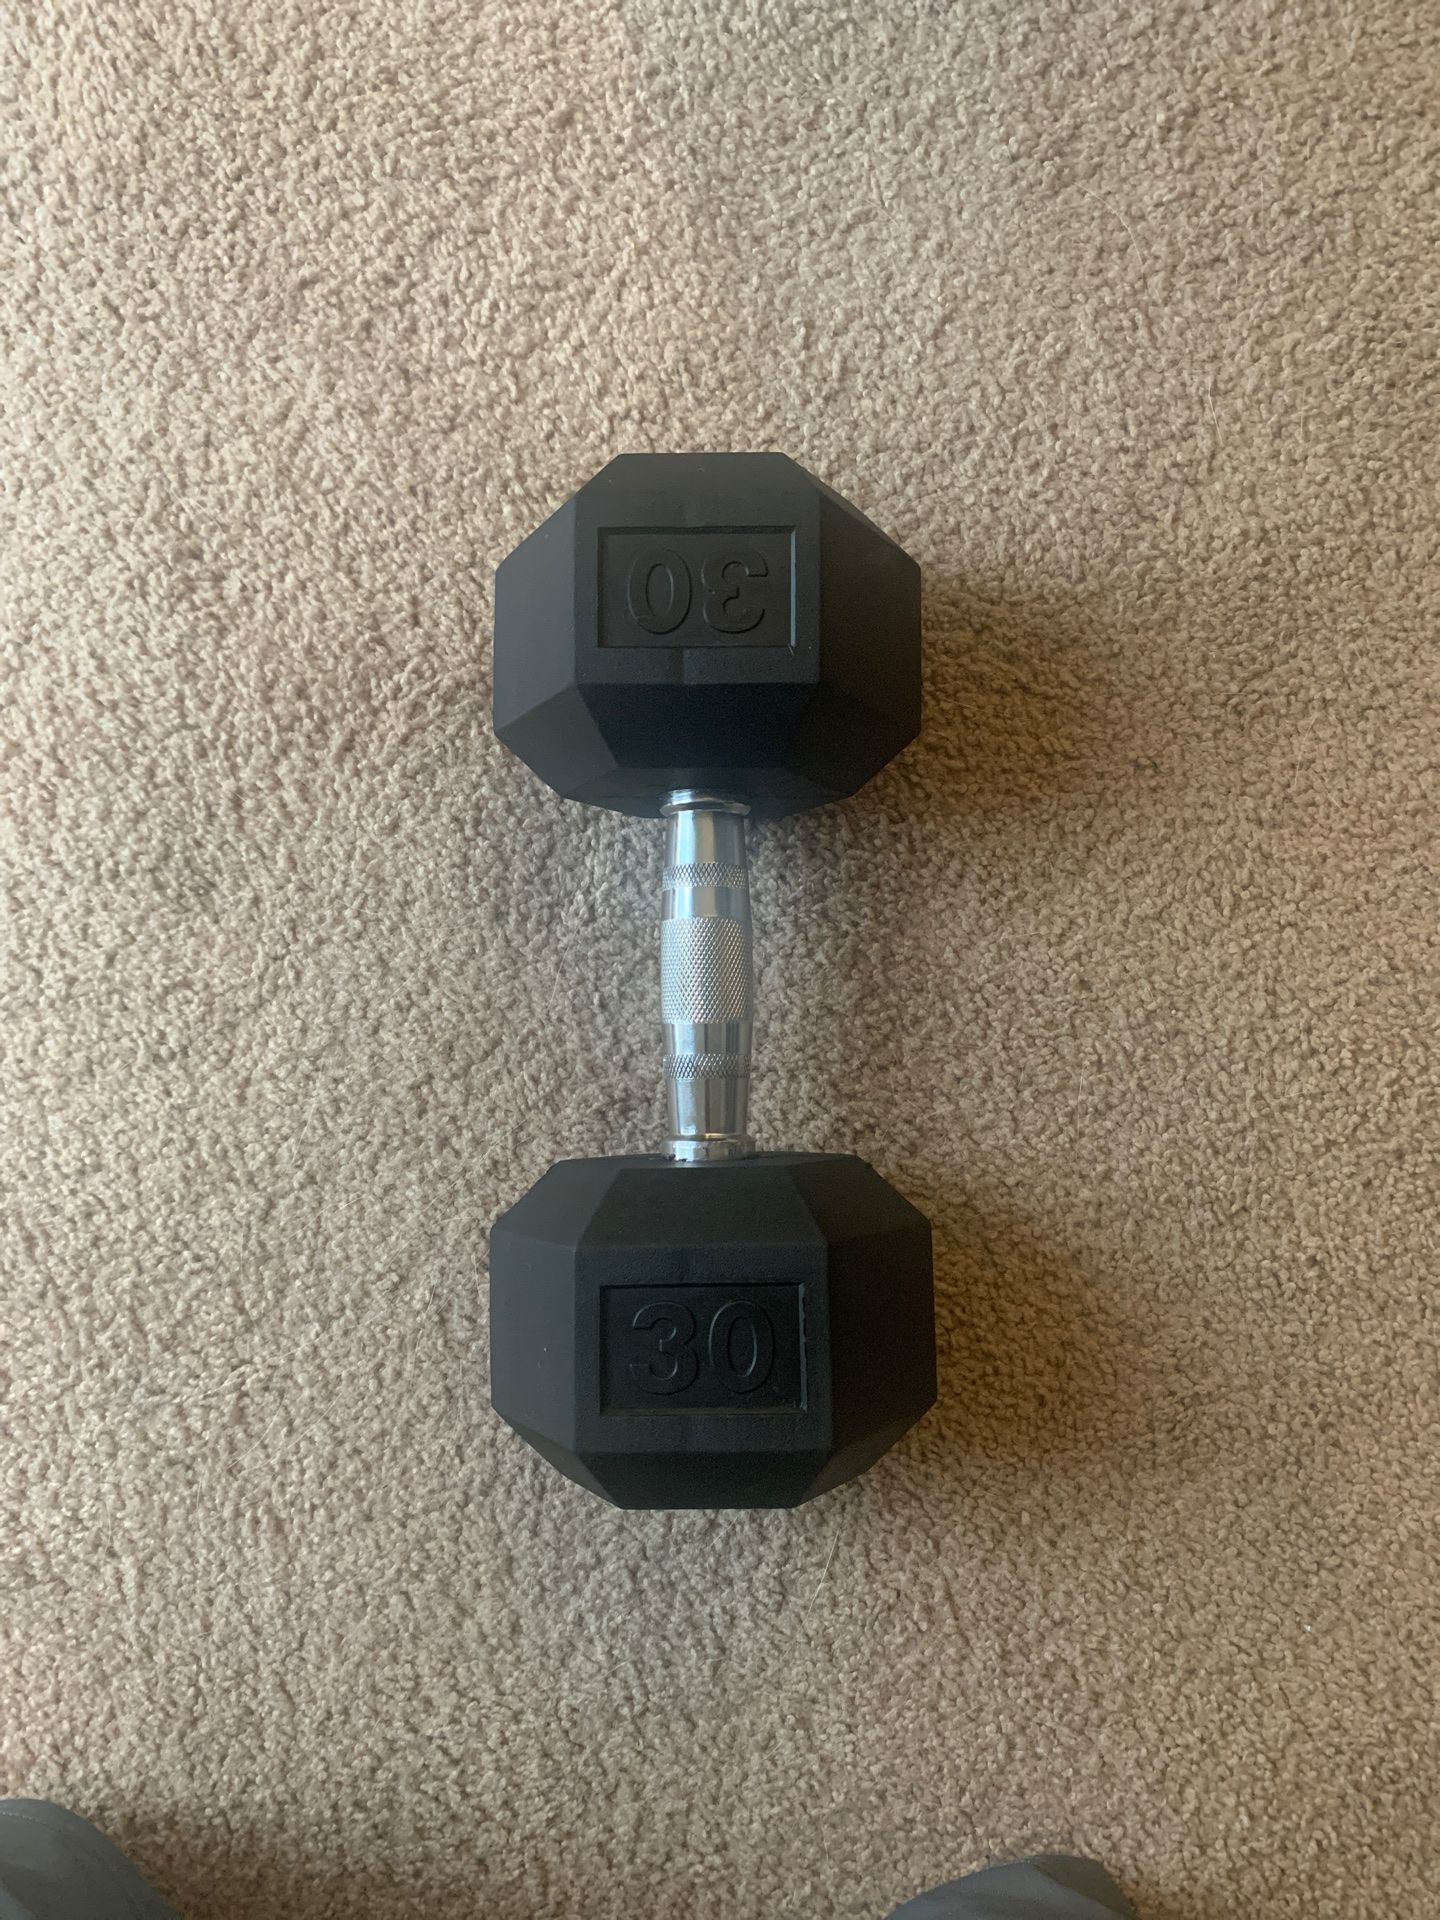 Brand New Dumbell Weight!